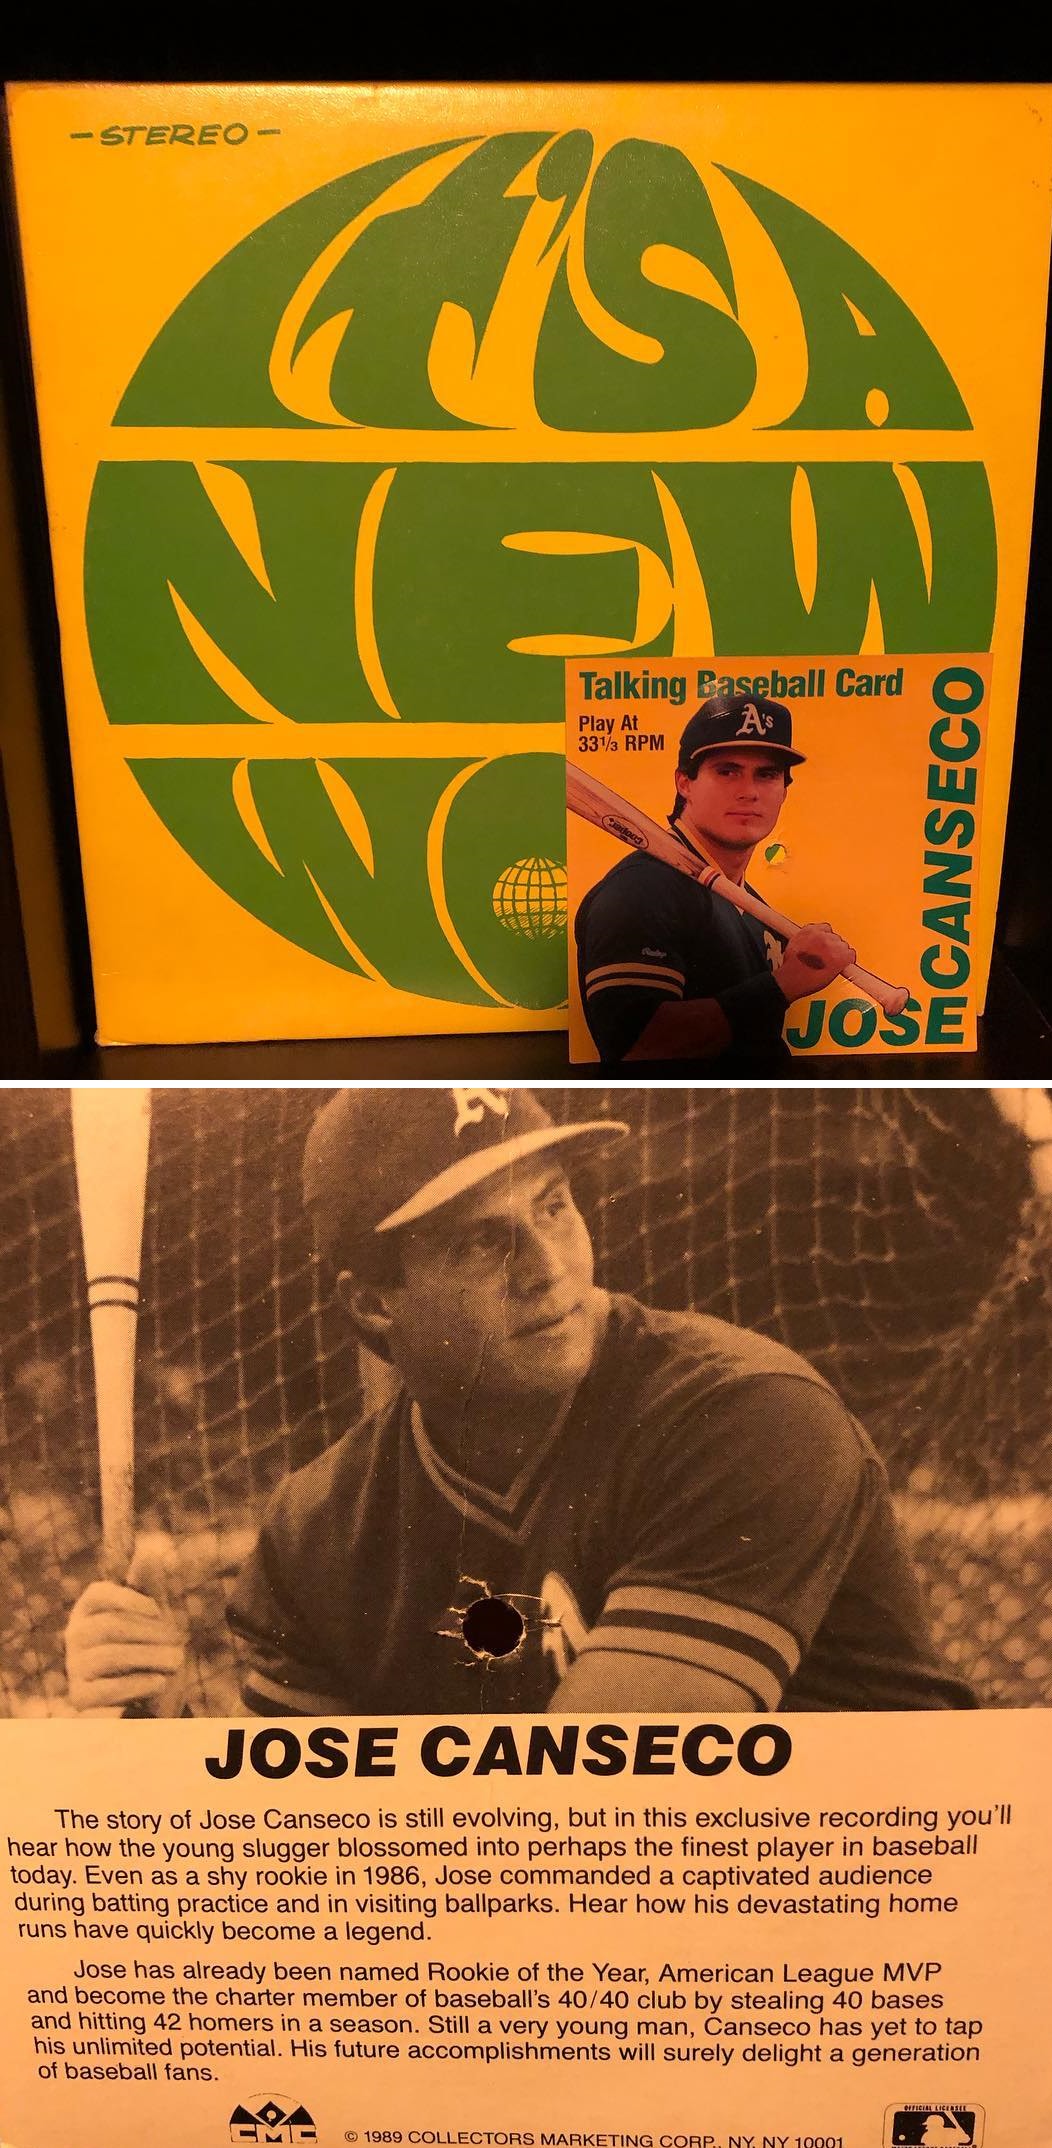 Found this Jose Canseco Talking Baseball Card inside this Christian Folk LP. The card is dated 1989, which is before that home run bounced fair off his head in left field and before he blew his middle finger off with a shotgun and told the press that “it